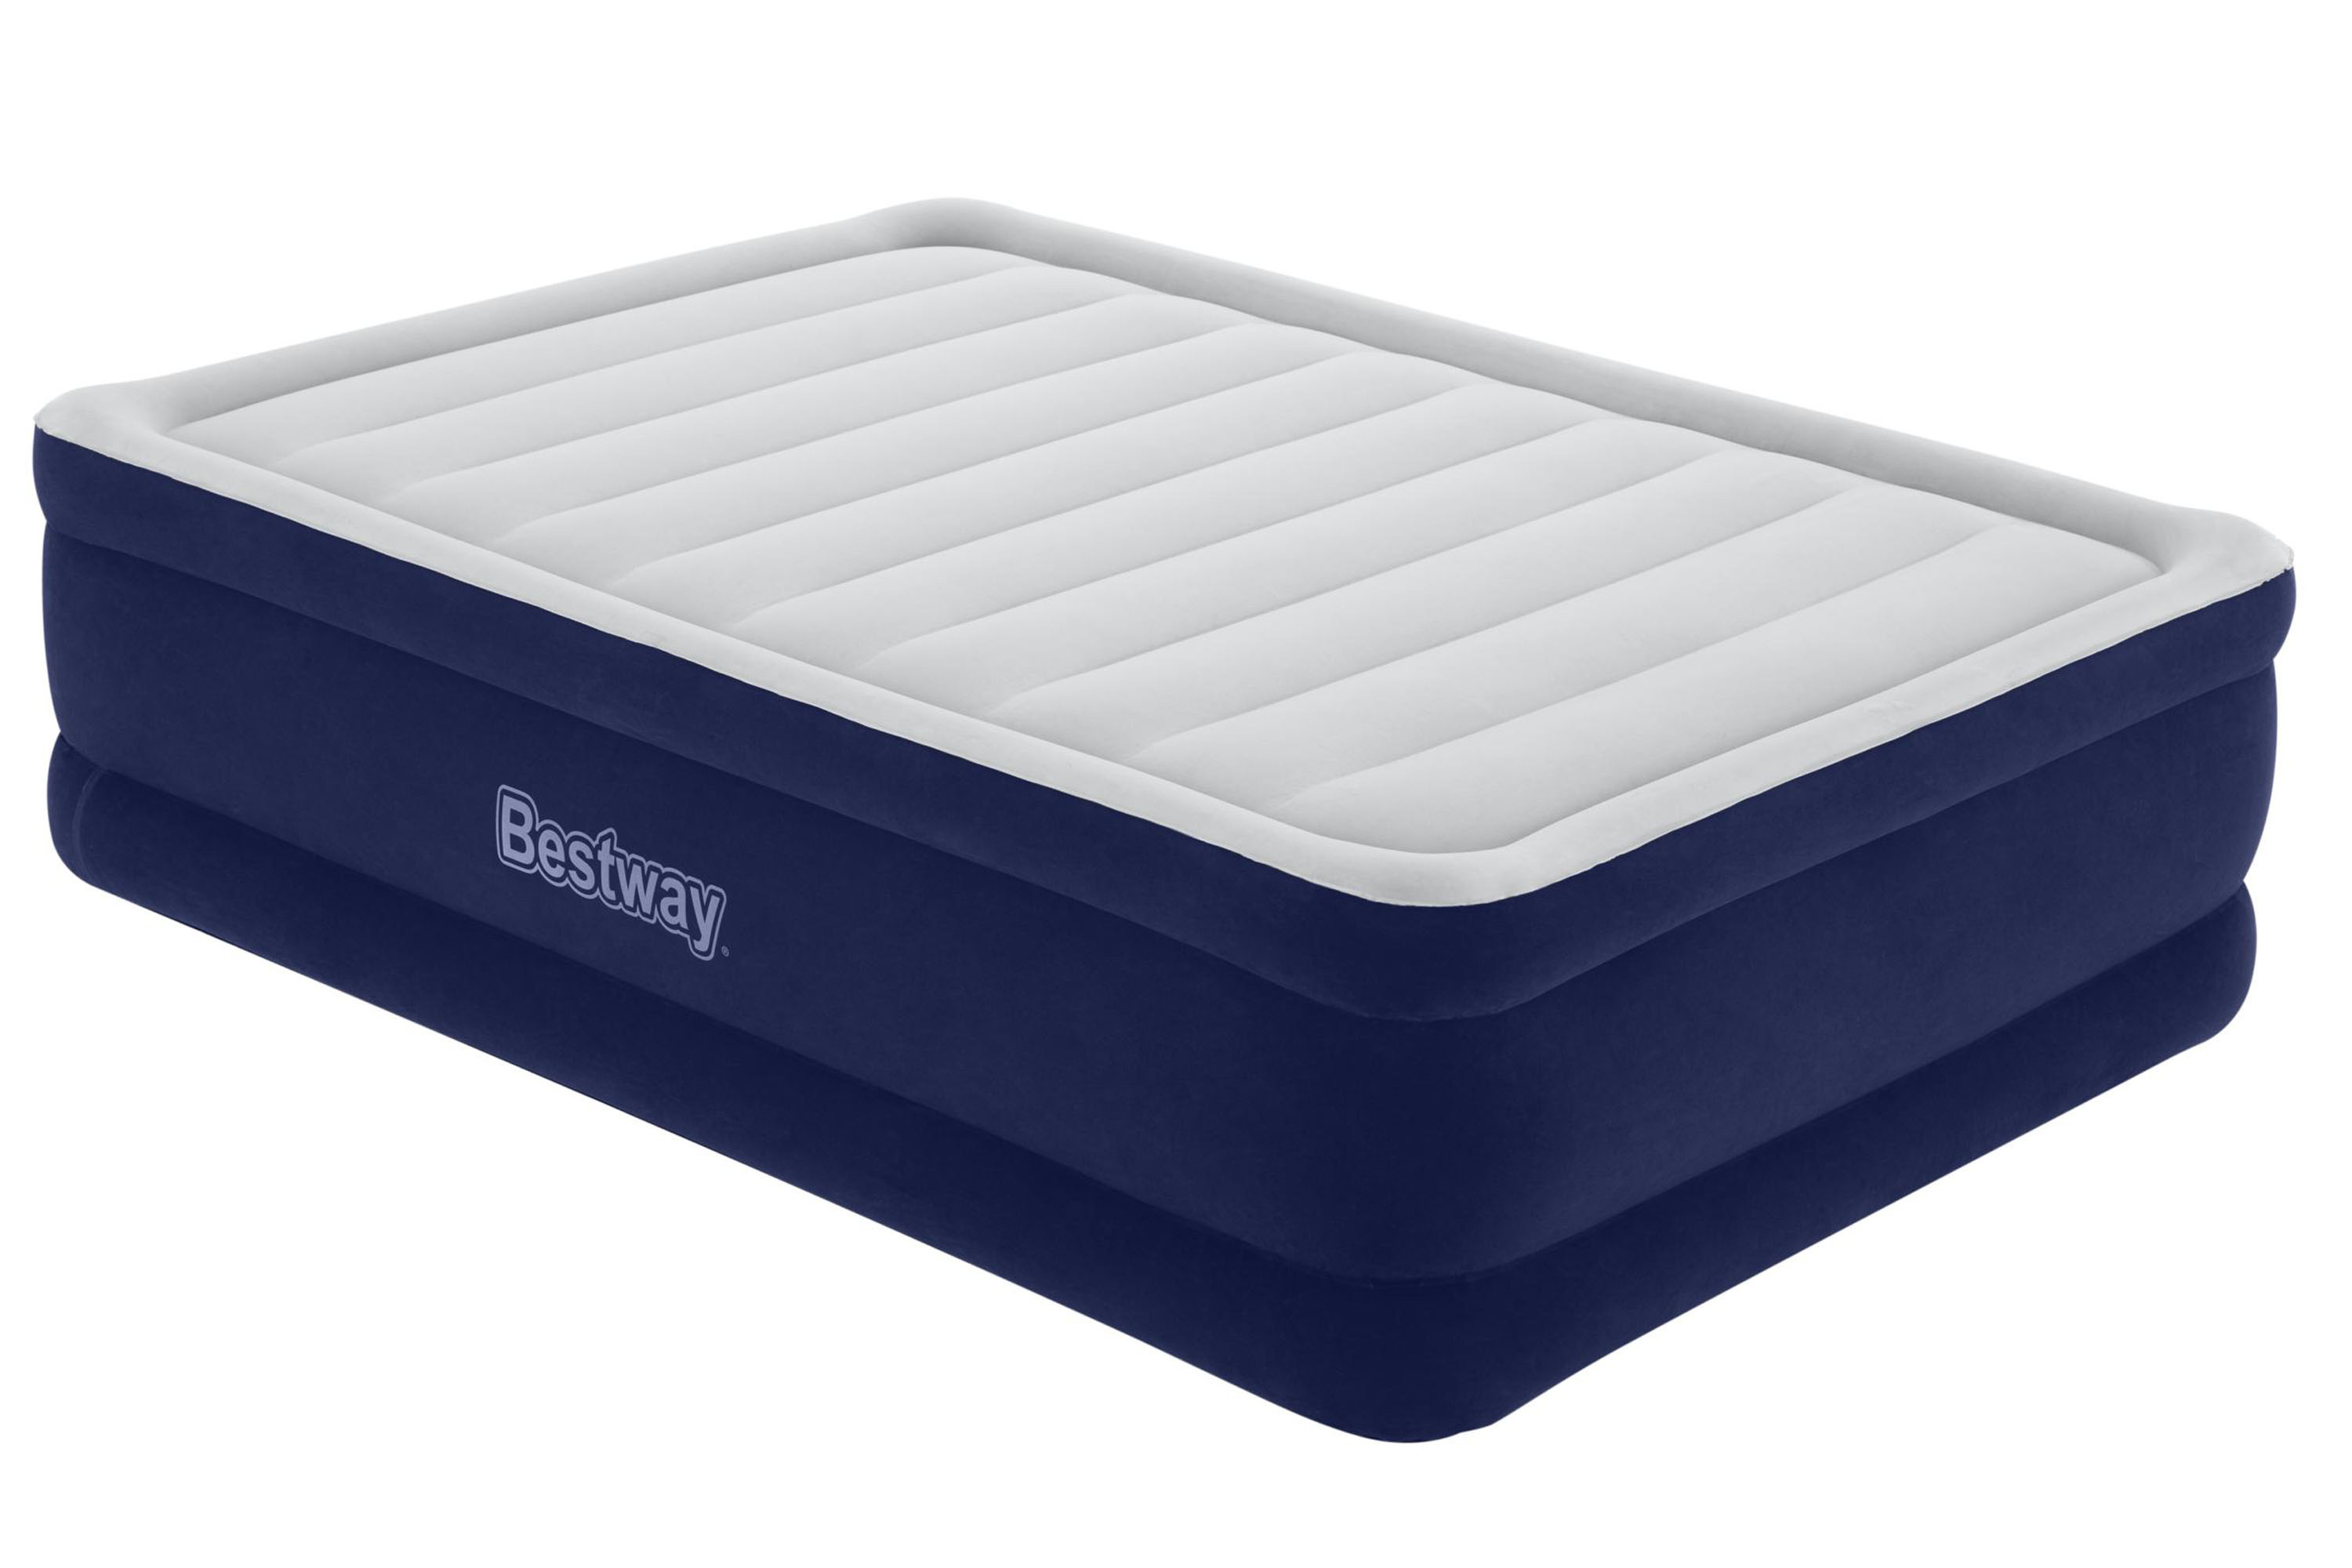 Bestway Tritech Air Mattress Queen 22 in. with Built-in AC Pump and Antimicrobial Coating - image 1 of 12